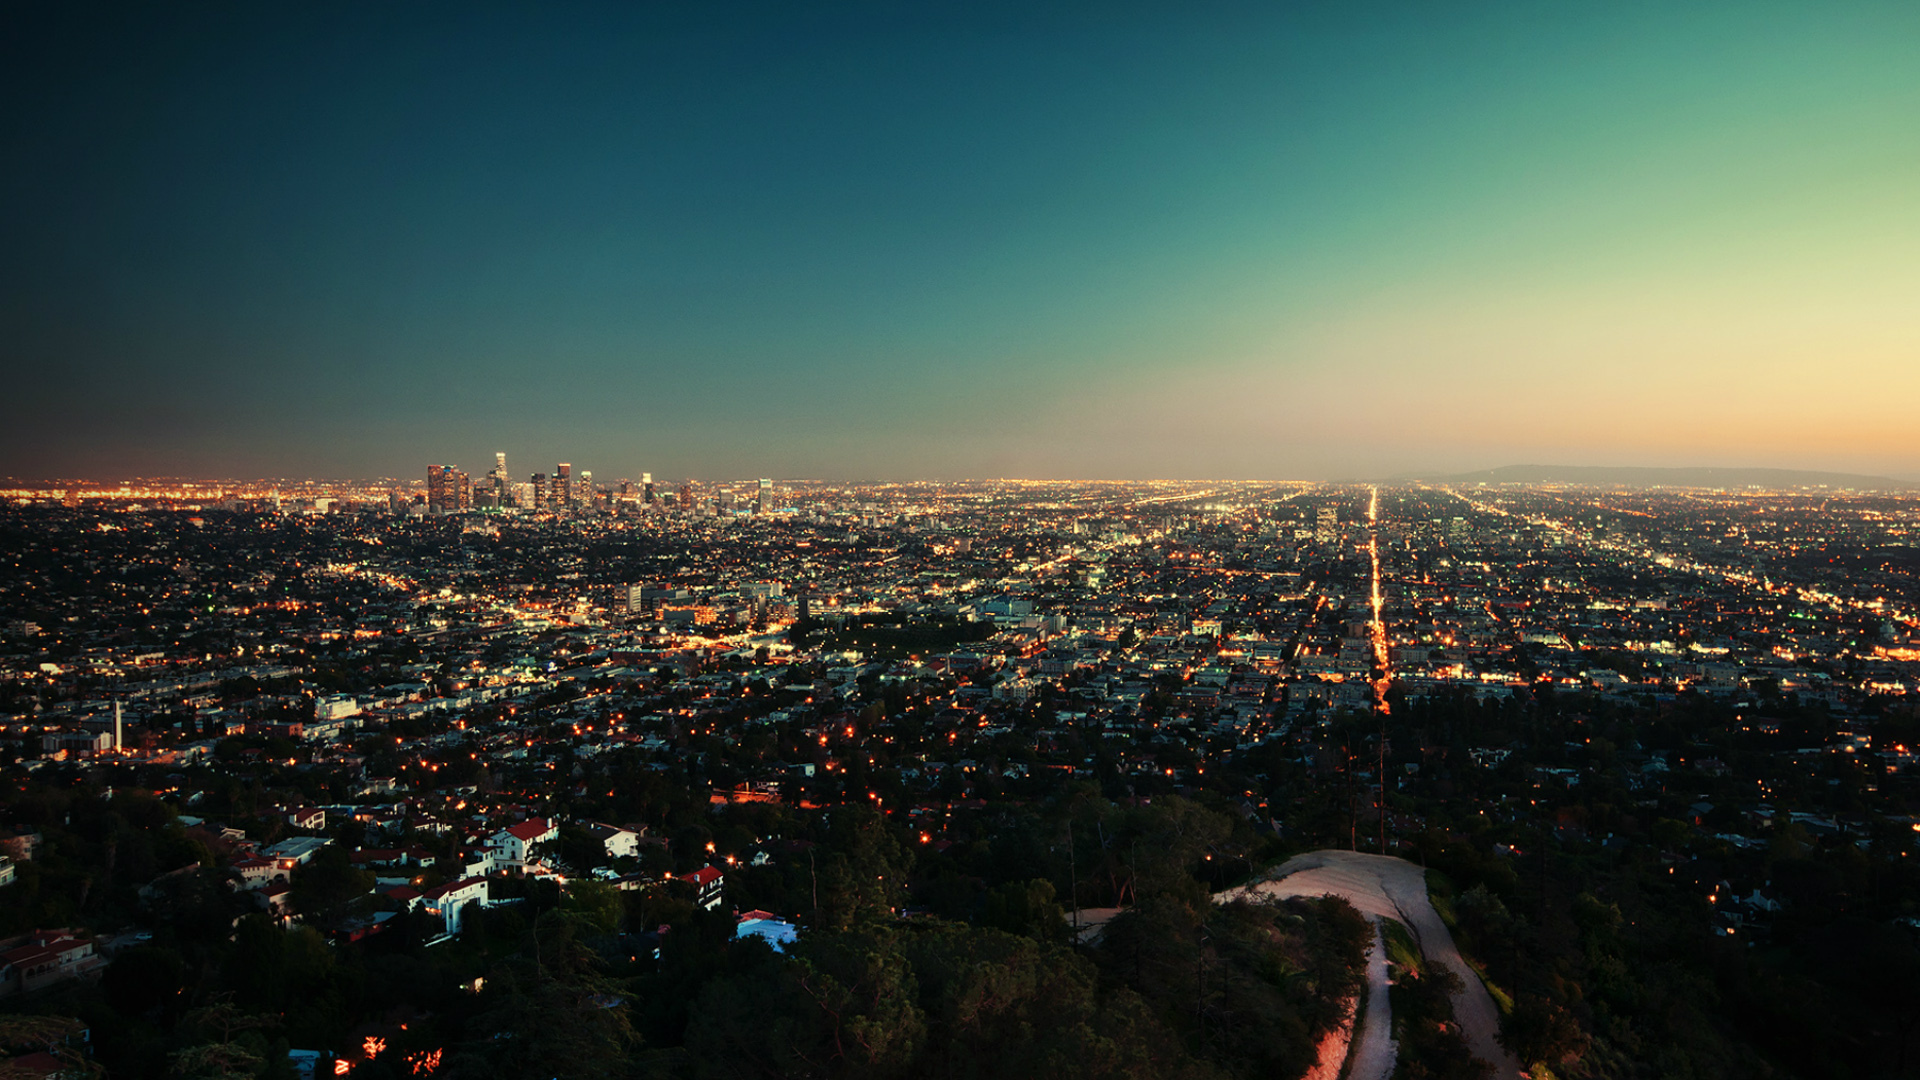 los angeles, man made, cities